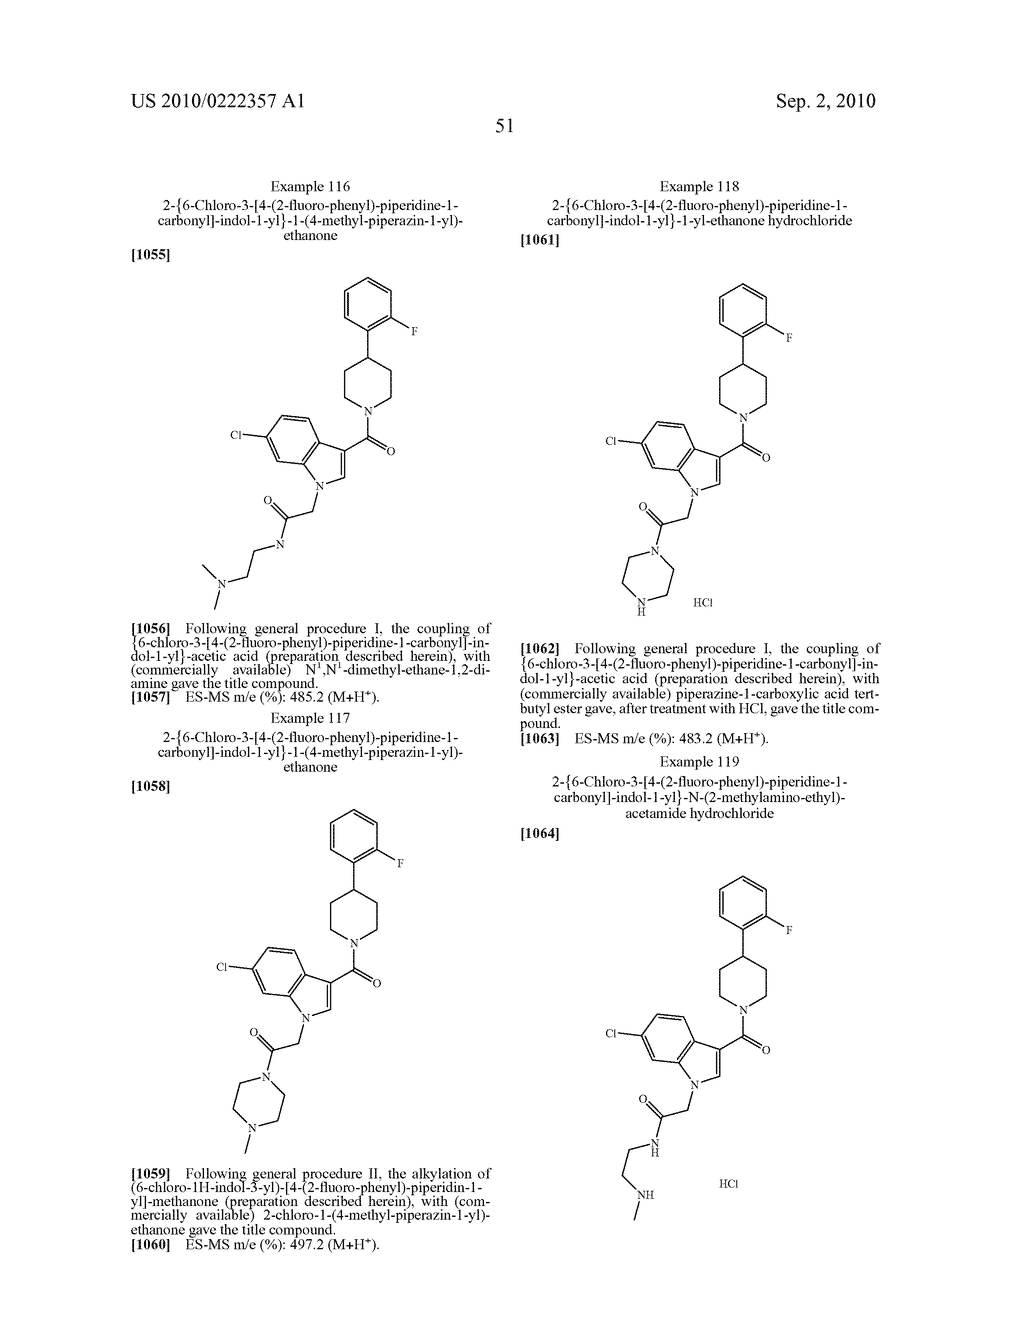 INDOL-3-Y-CARBONYL-PIPERIDIN AND PIPERAZIN-DERIVATIVES - diagram, schematic, and image 52